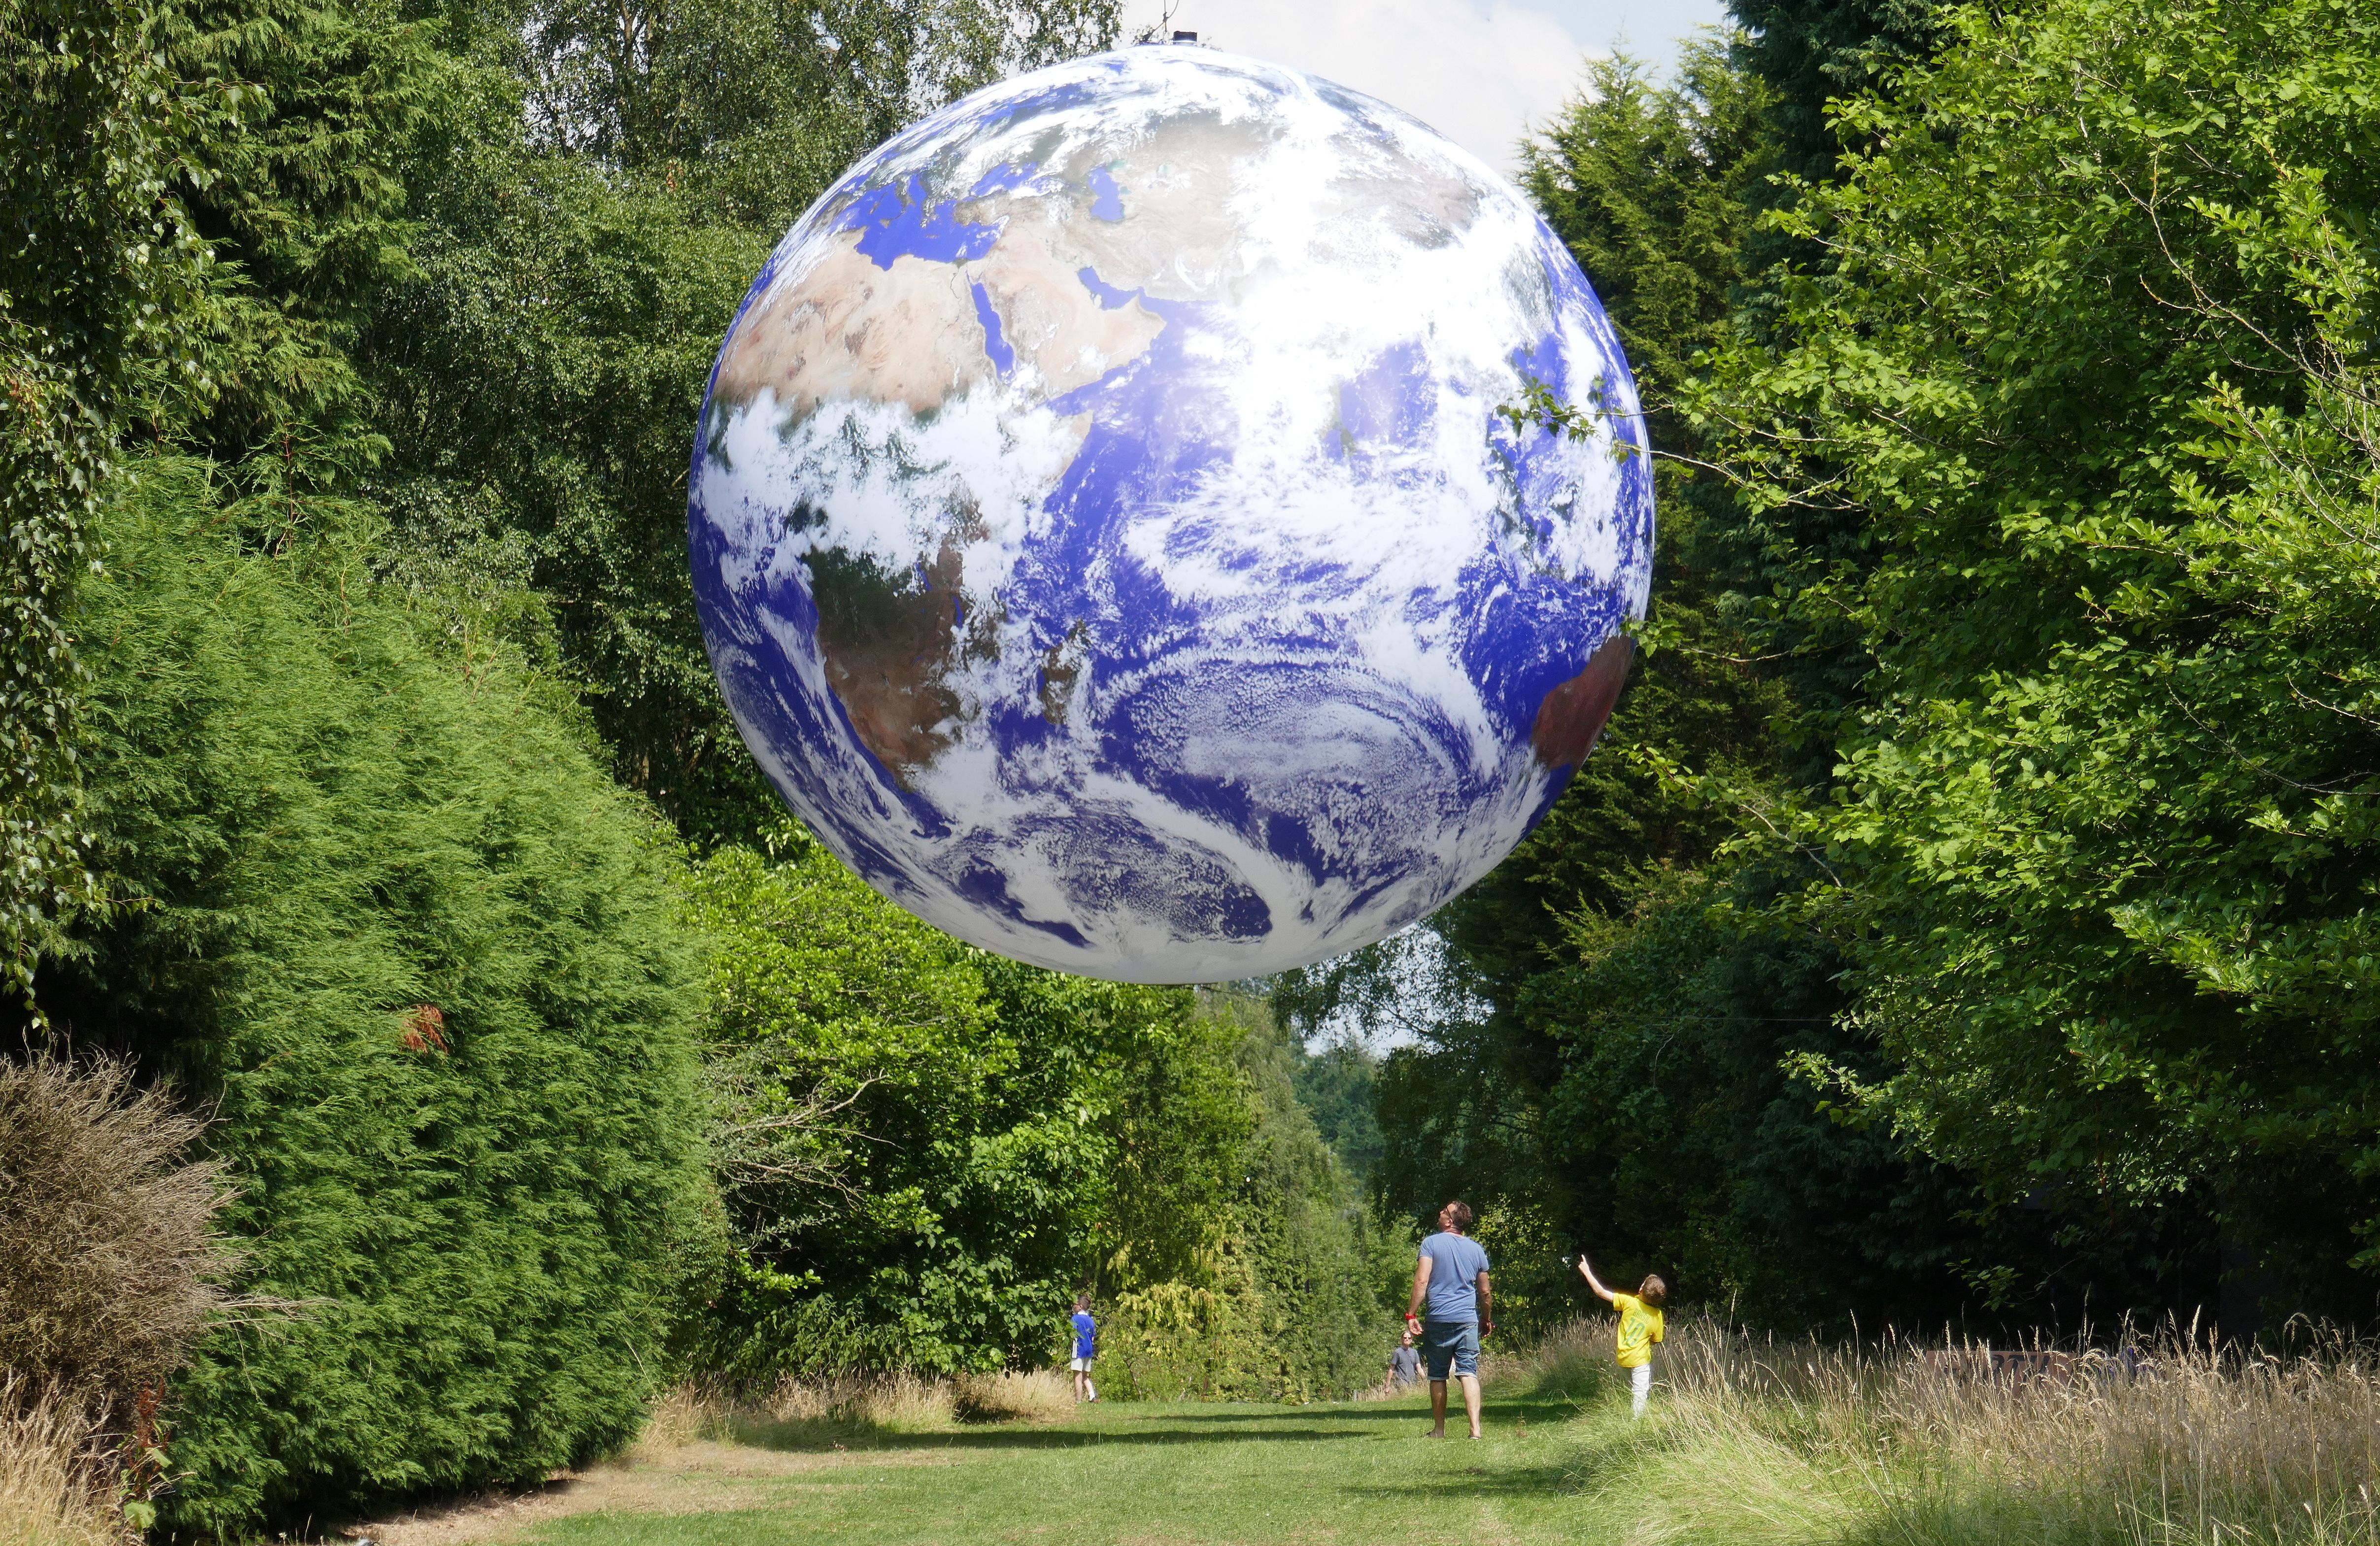 In an outdoor setting, an adult and child look up above them to see an enormous globe that is positioned in the sky, reaching the height of the tops of the trees.